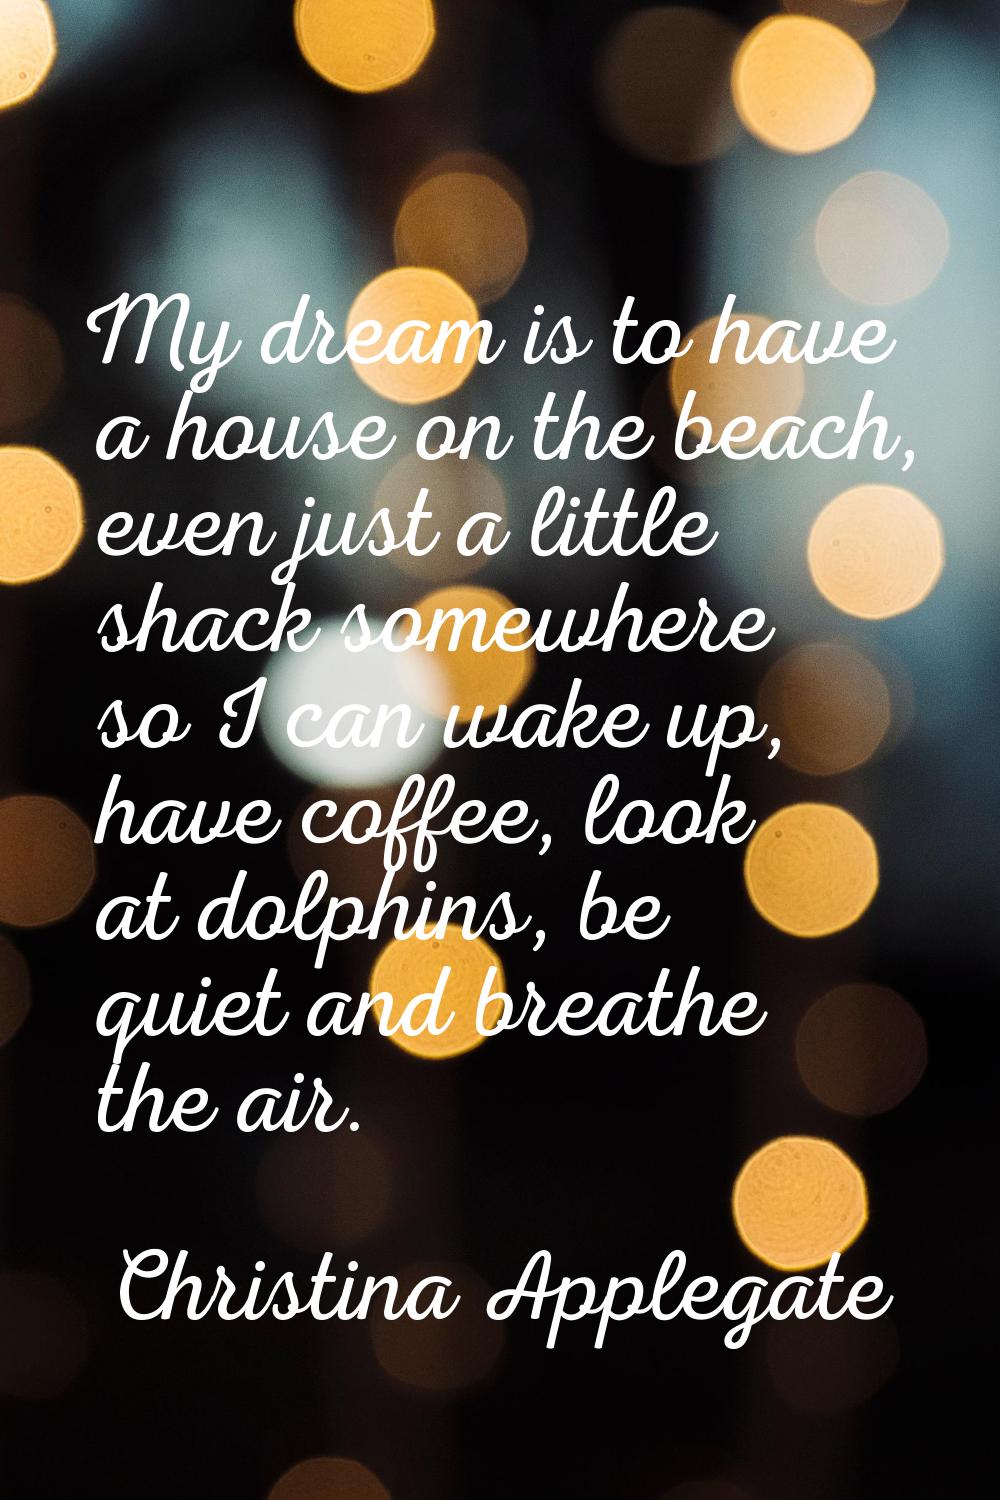 My dream is to have a house on the beach, even just a little shack somewhere so I can wake up, have